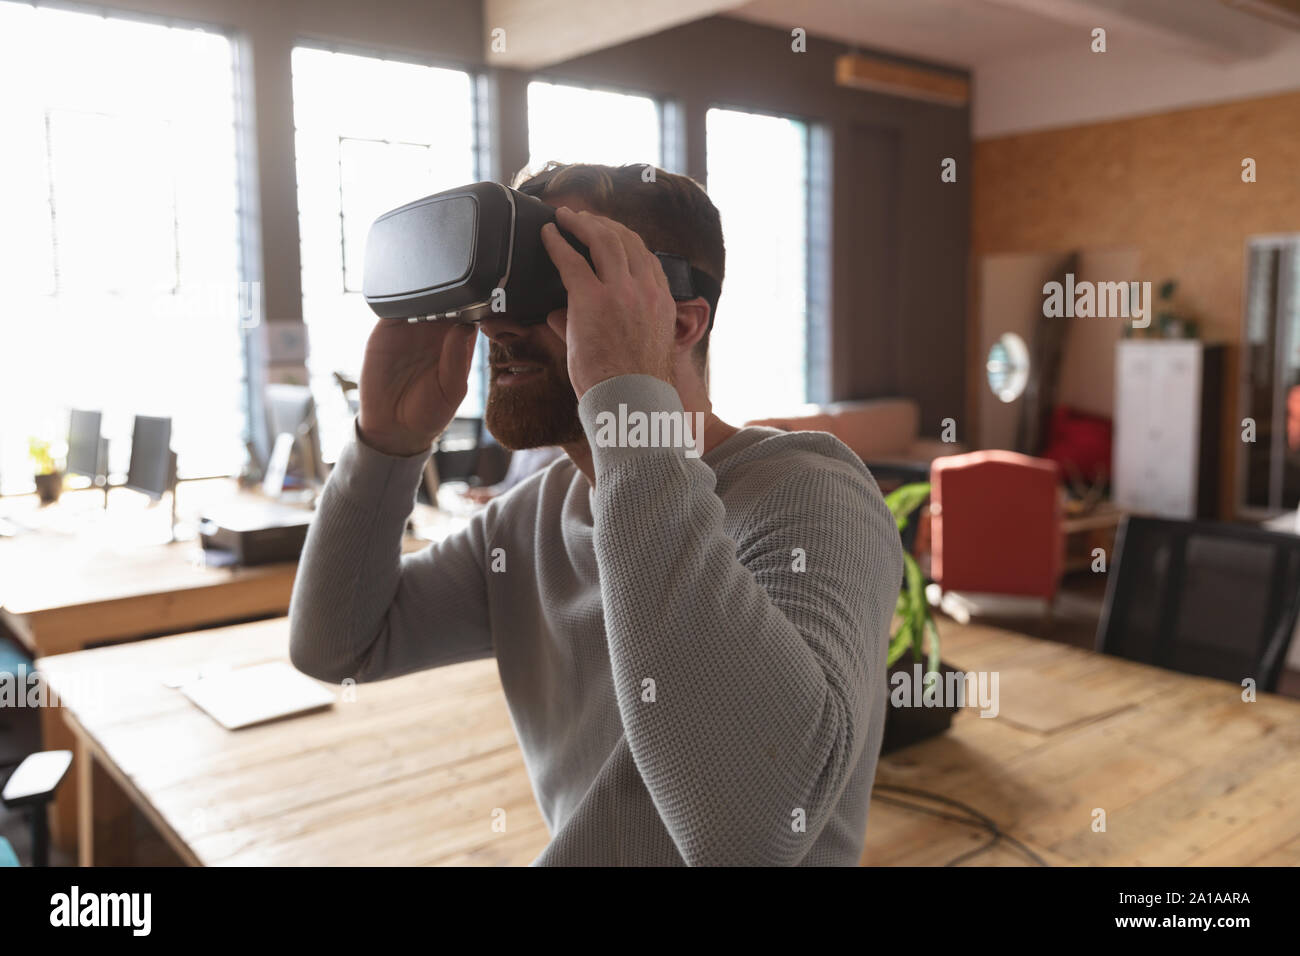 Young creative professional man using VR headset in a sunlit office Stock Photo